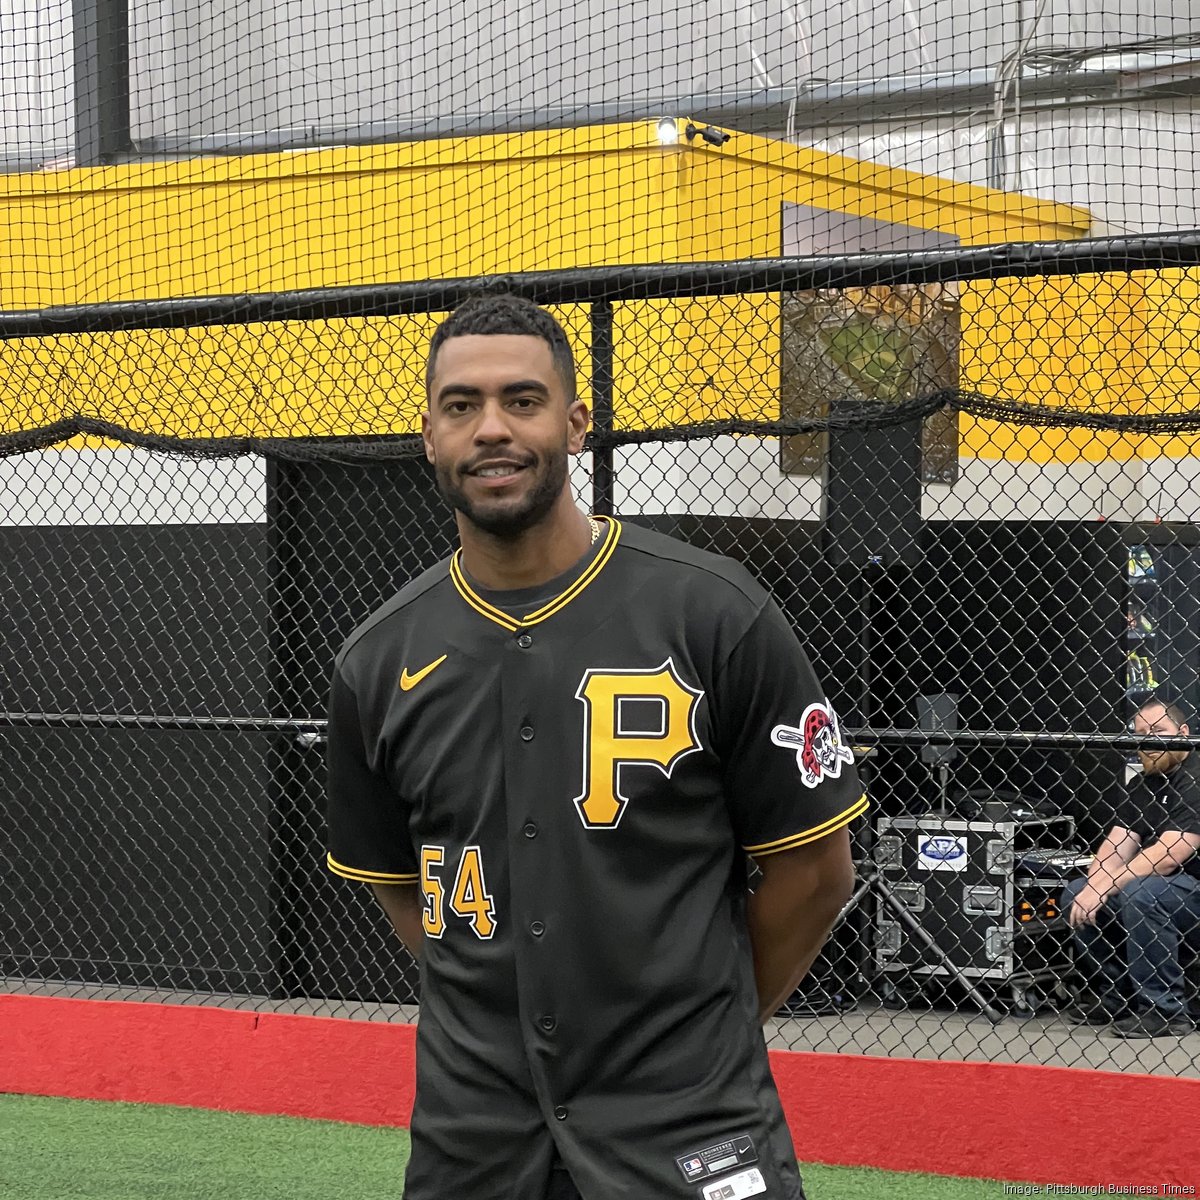 New Pirates Training Center adds tech, heart to region's youth